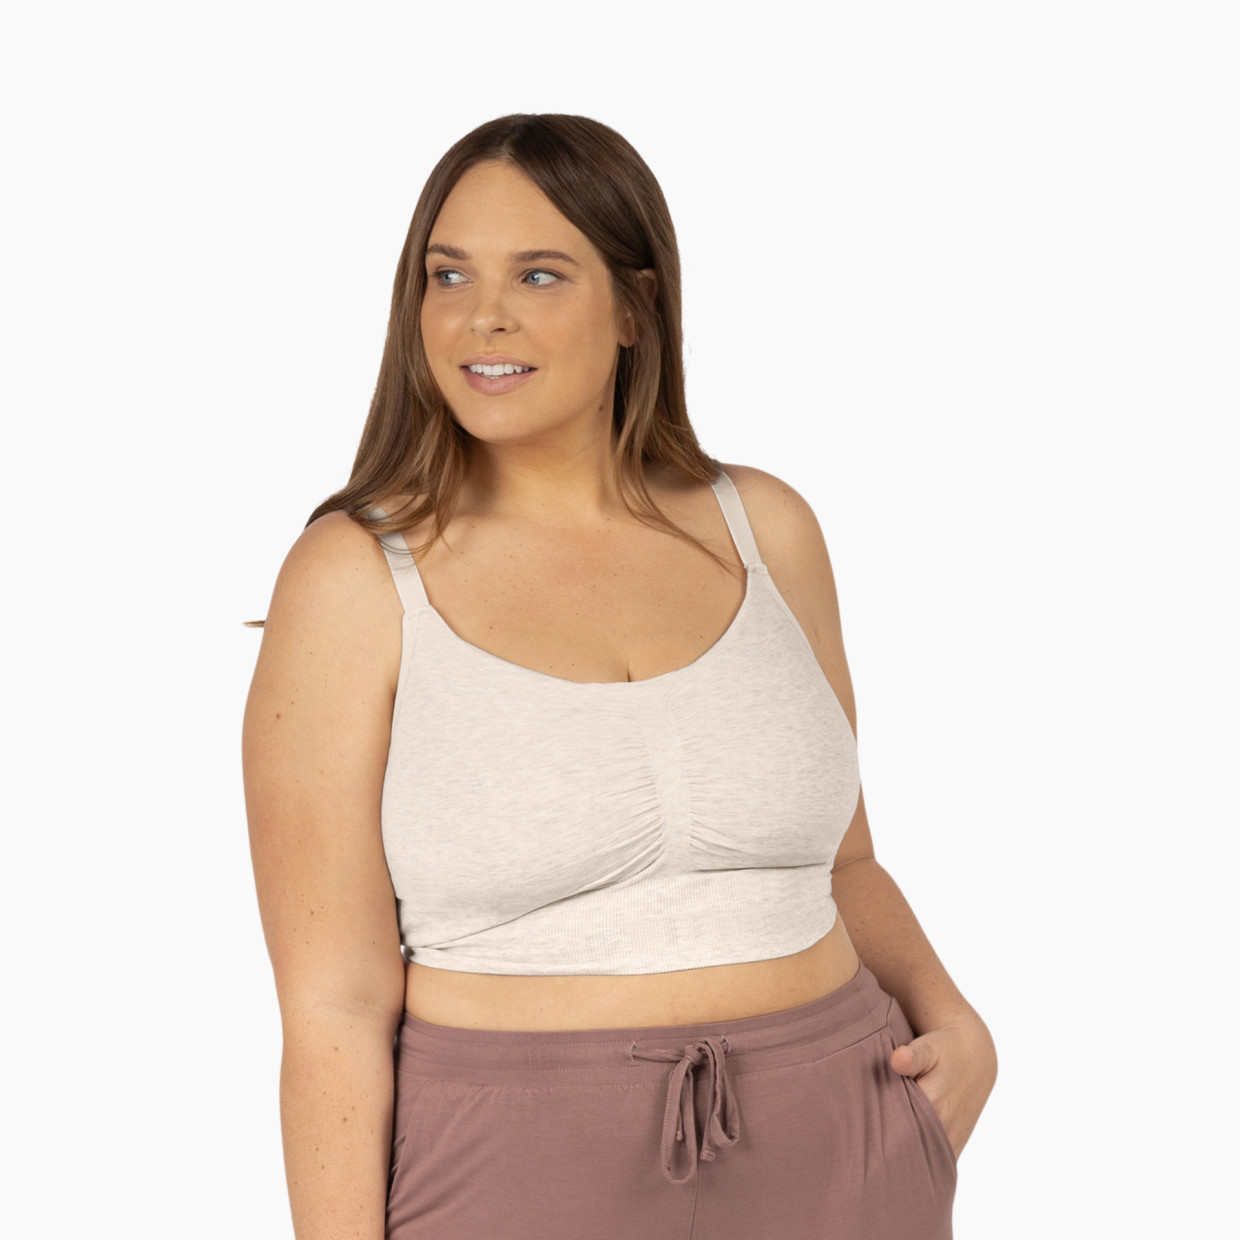 Kindred Bravely Sublime Bamboo Hands-Free Pumping Lounge & Sleep Bra - Oatmeal Heather, X-Large-Busty.